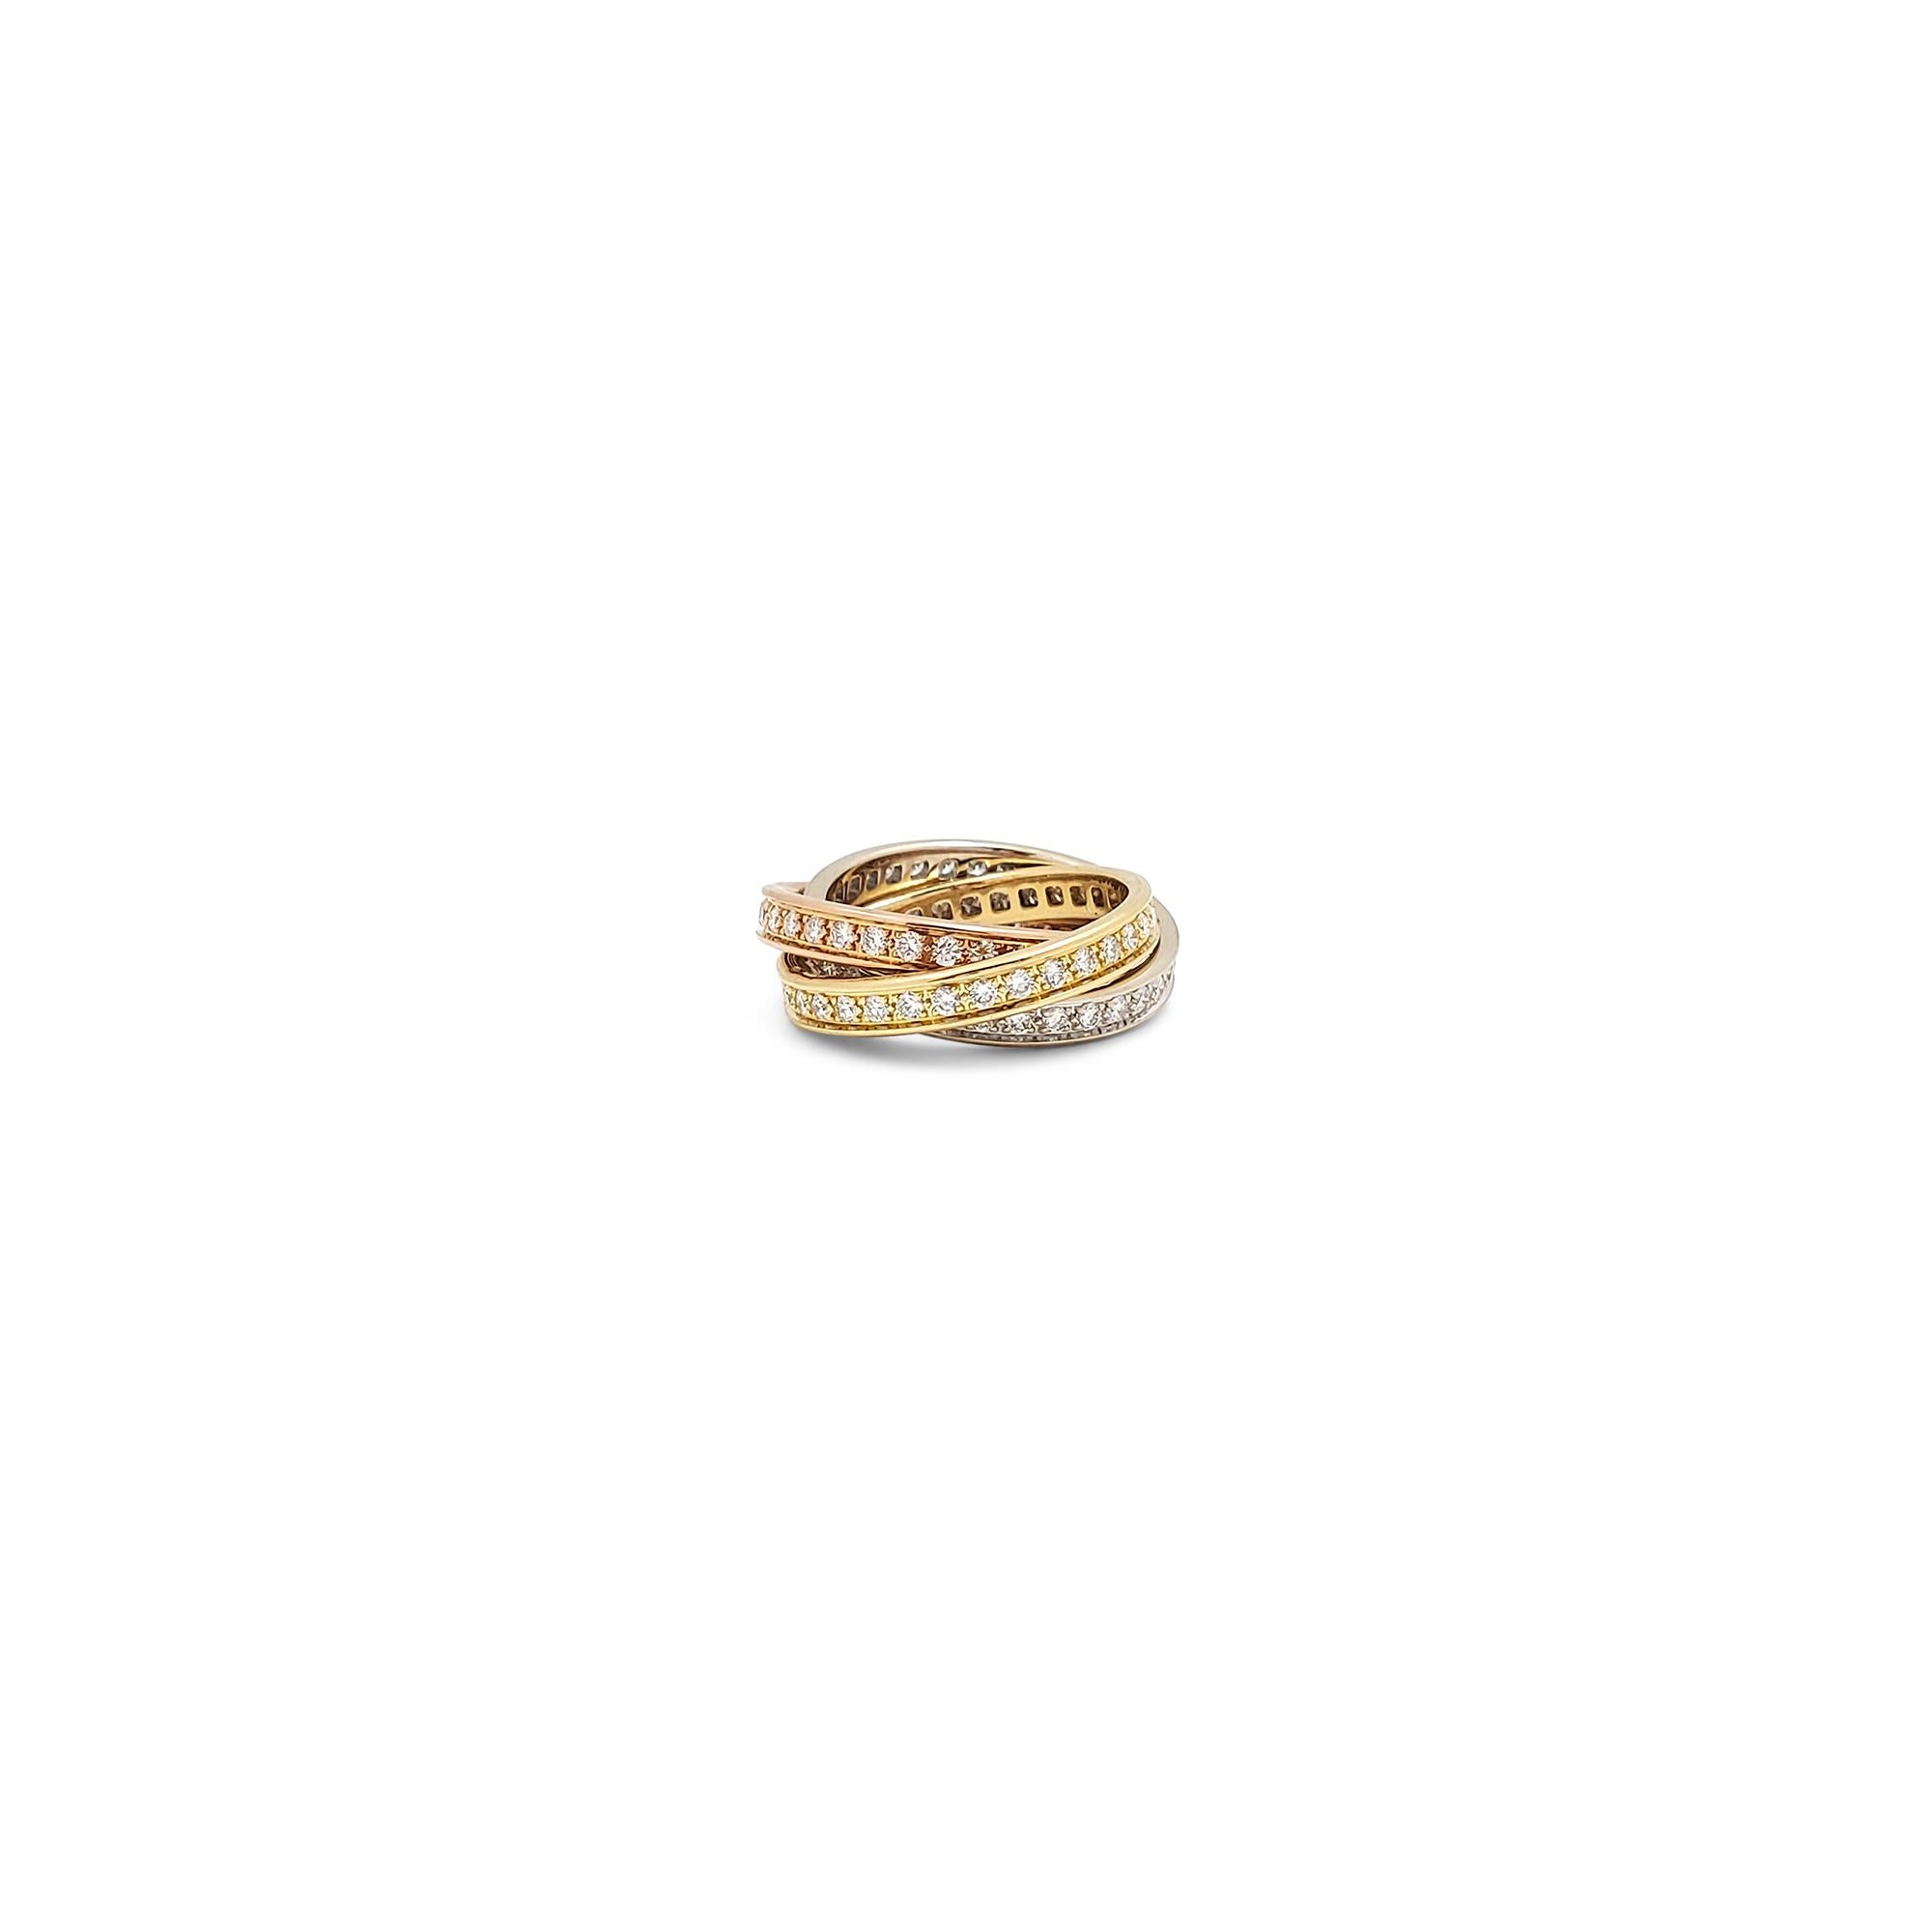 Authentic Cartier 'Trinity' ring comprised of three interlocking mobile bands of 18 karat yellow, rose, and white gold. Each ring is set with a single row of high-quality round brilliant cut diamonds for an estimated 1.55 carats total weight. 